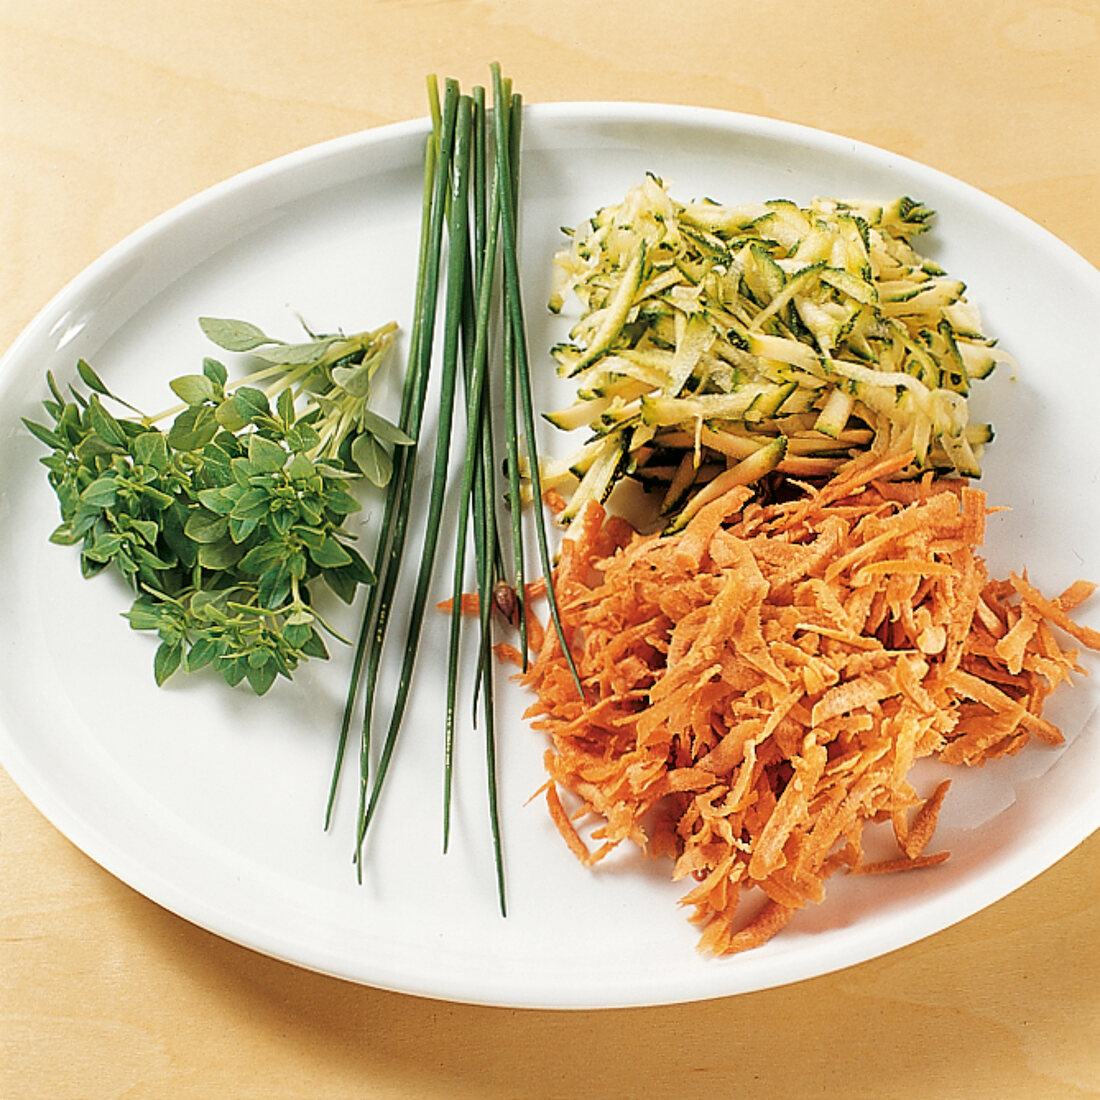 Carrots, grated zucchini, chives and herbs on plate